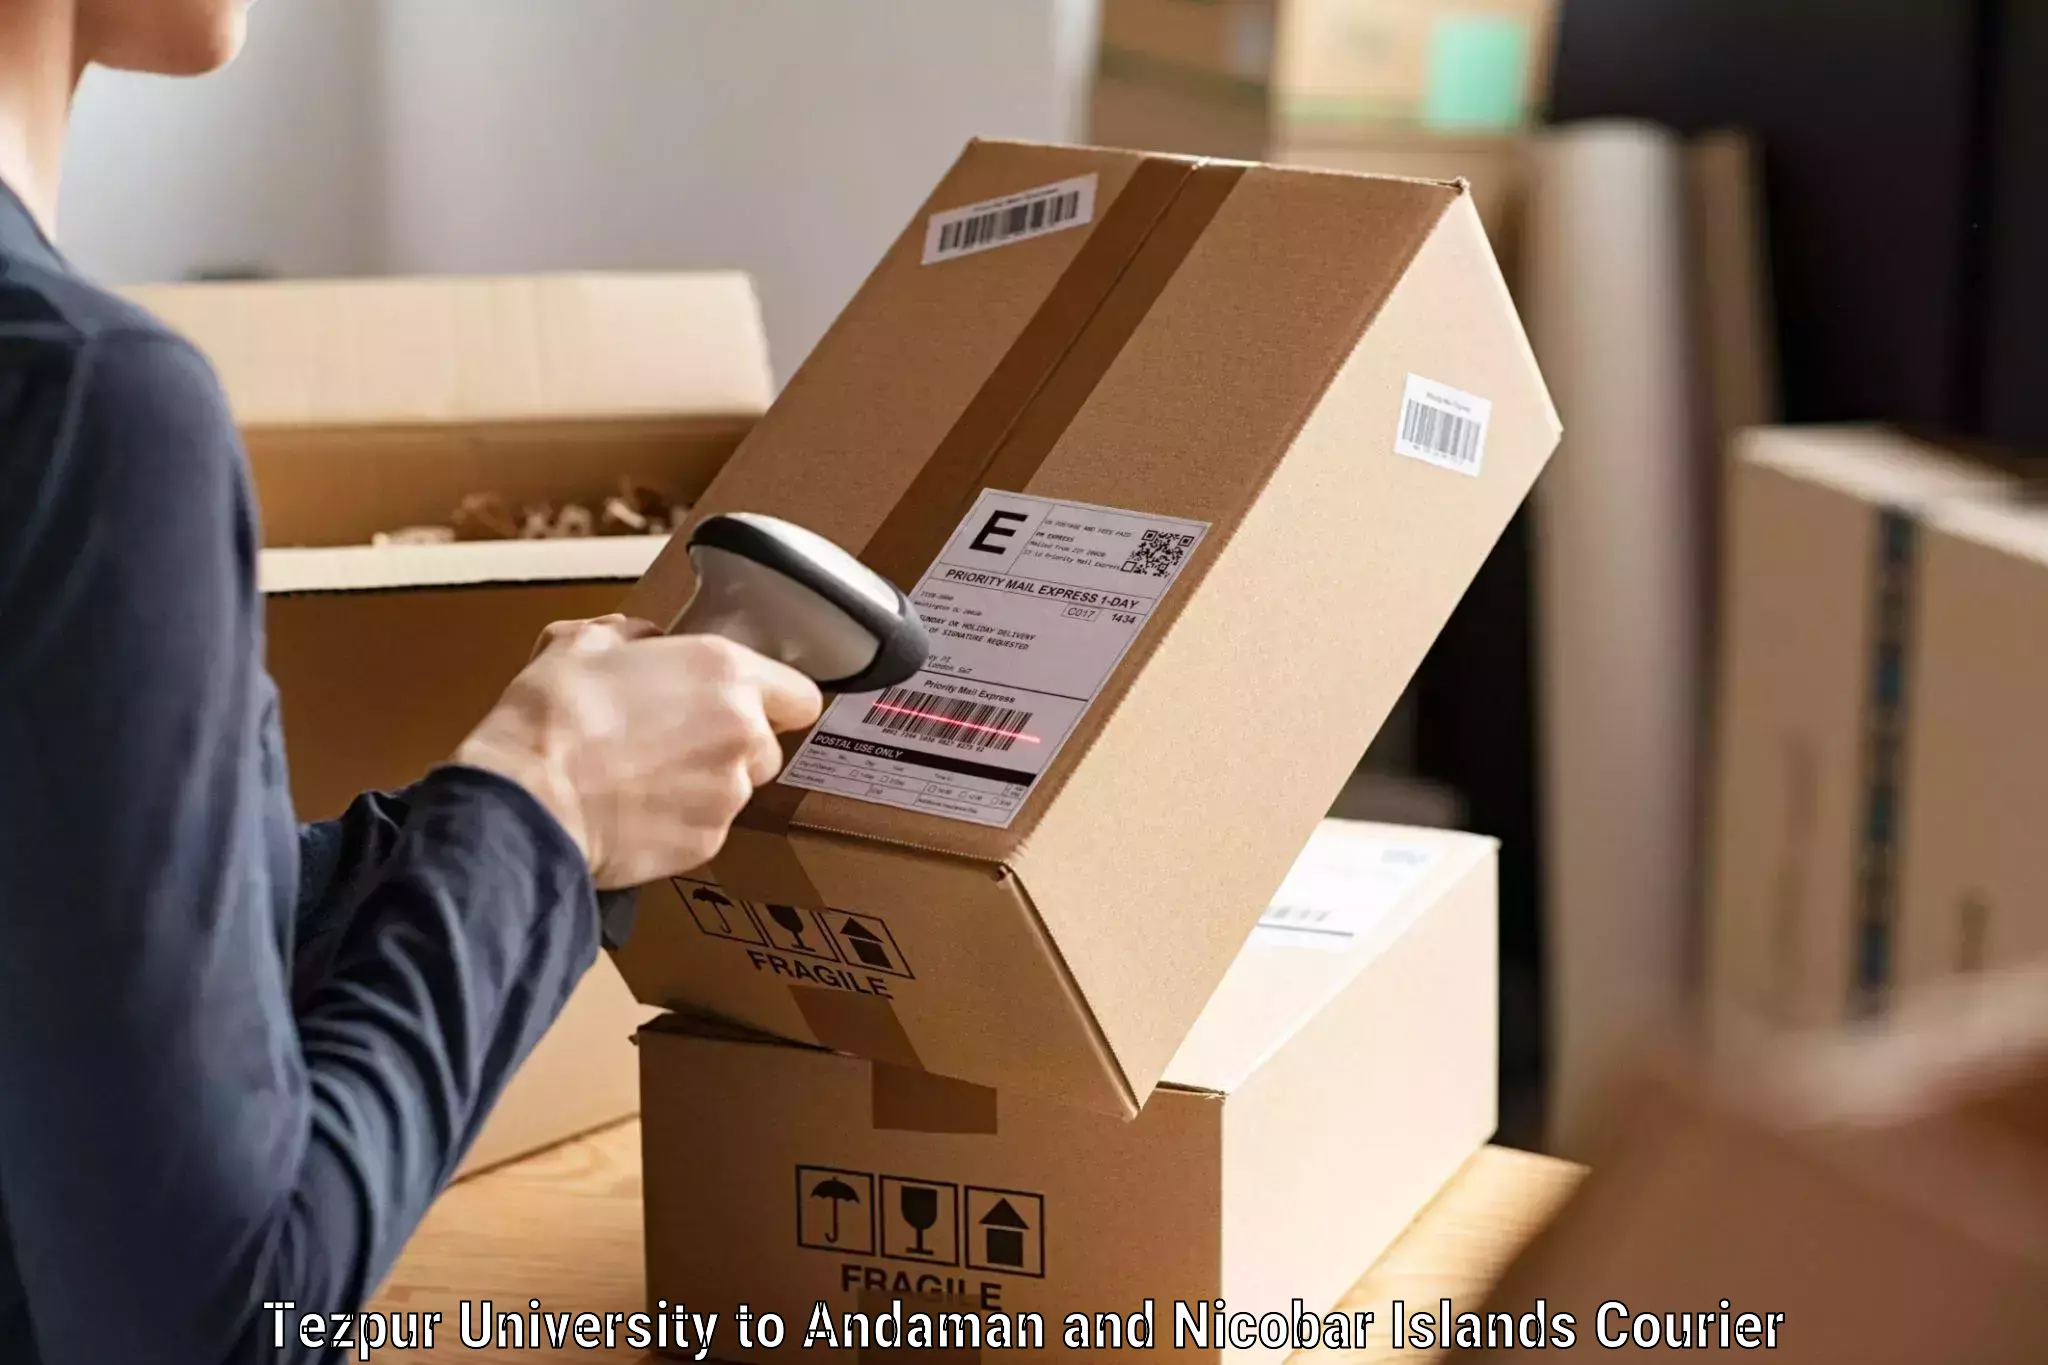 Multi-city courier Tezpur University to North And Middle Andaman